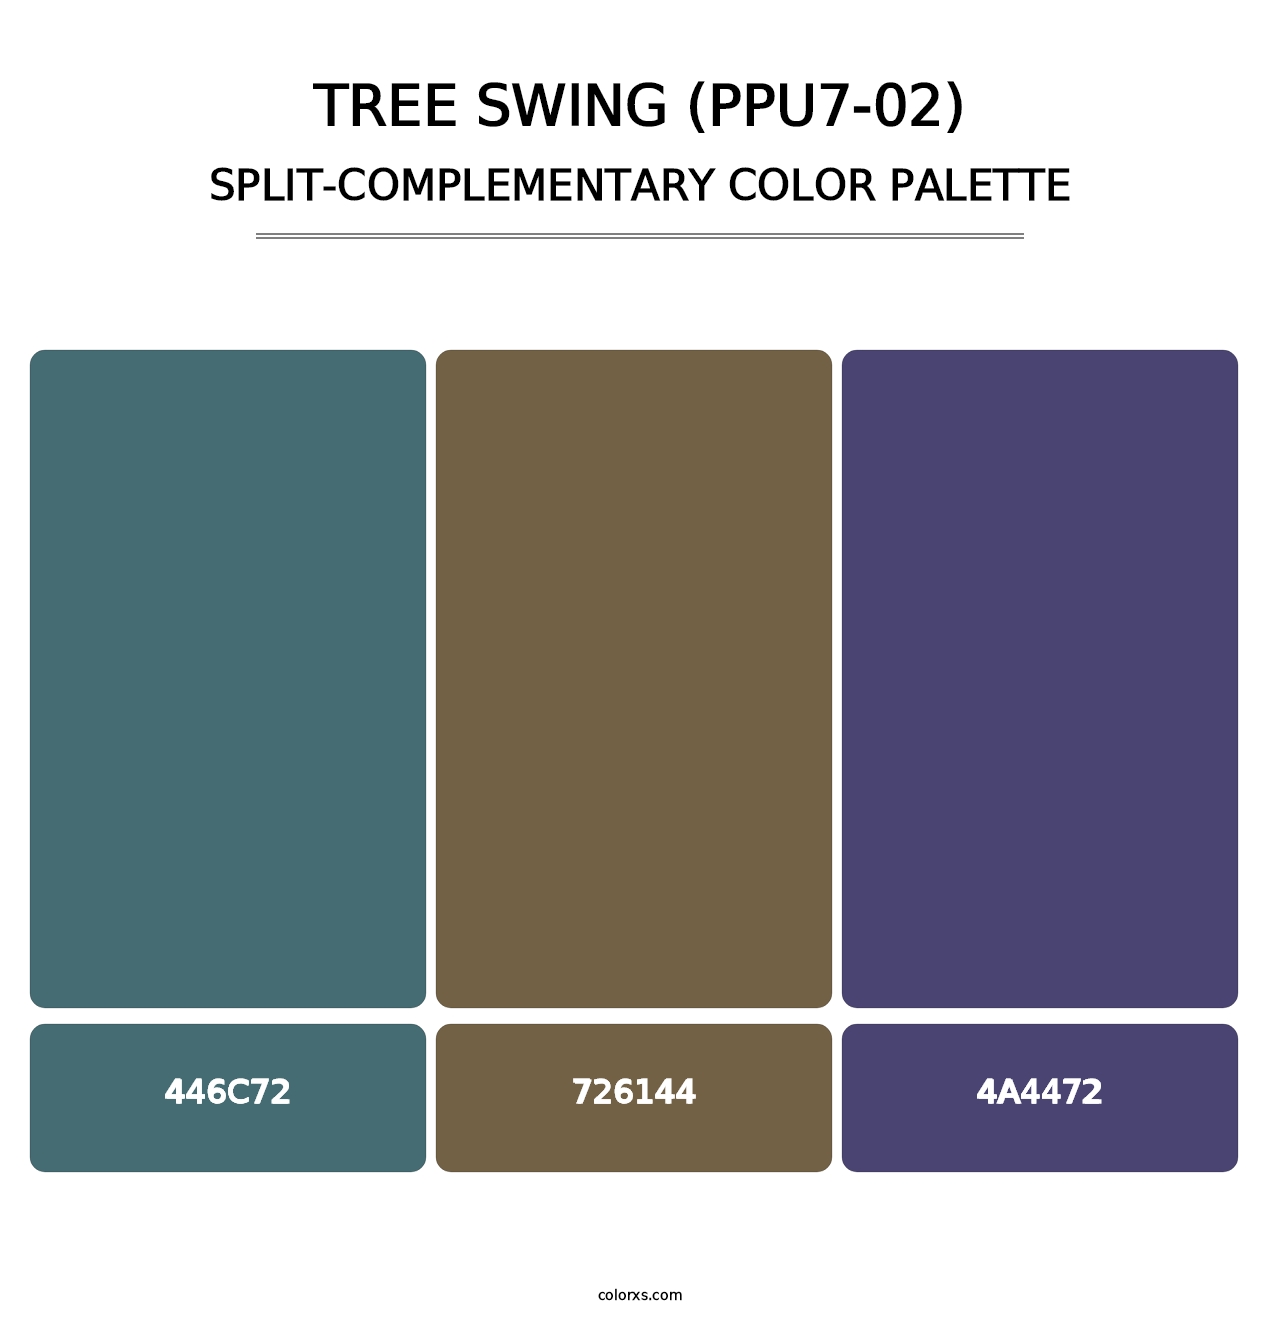 Tree Swing (PPU7-02) - Split-Complementary Color Palette